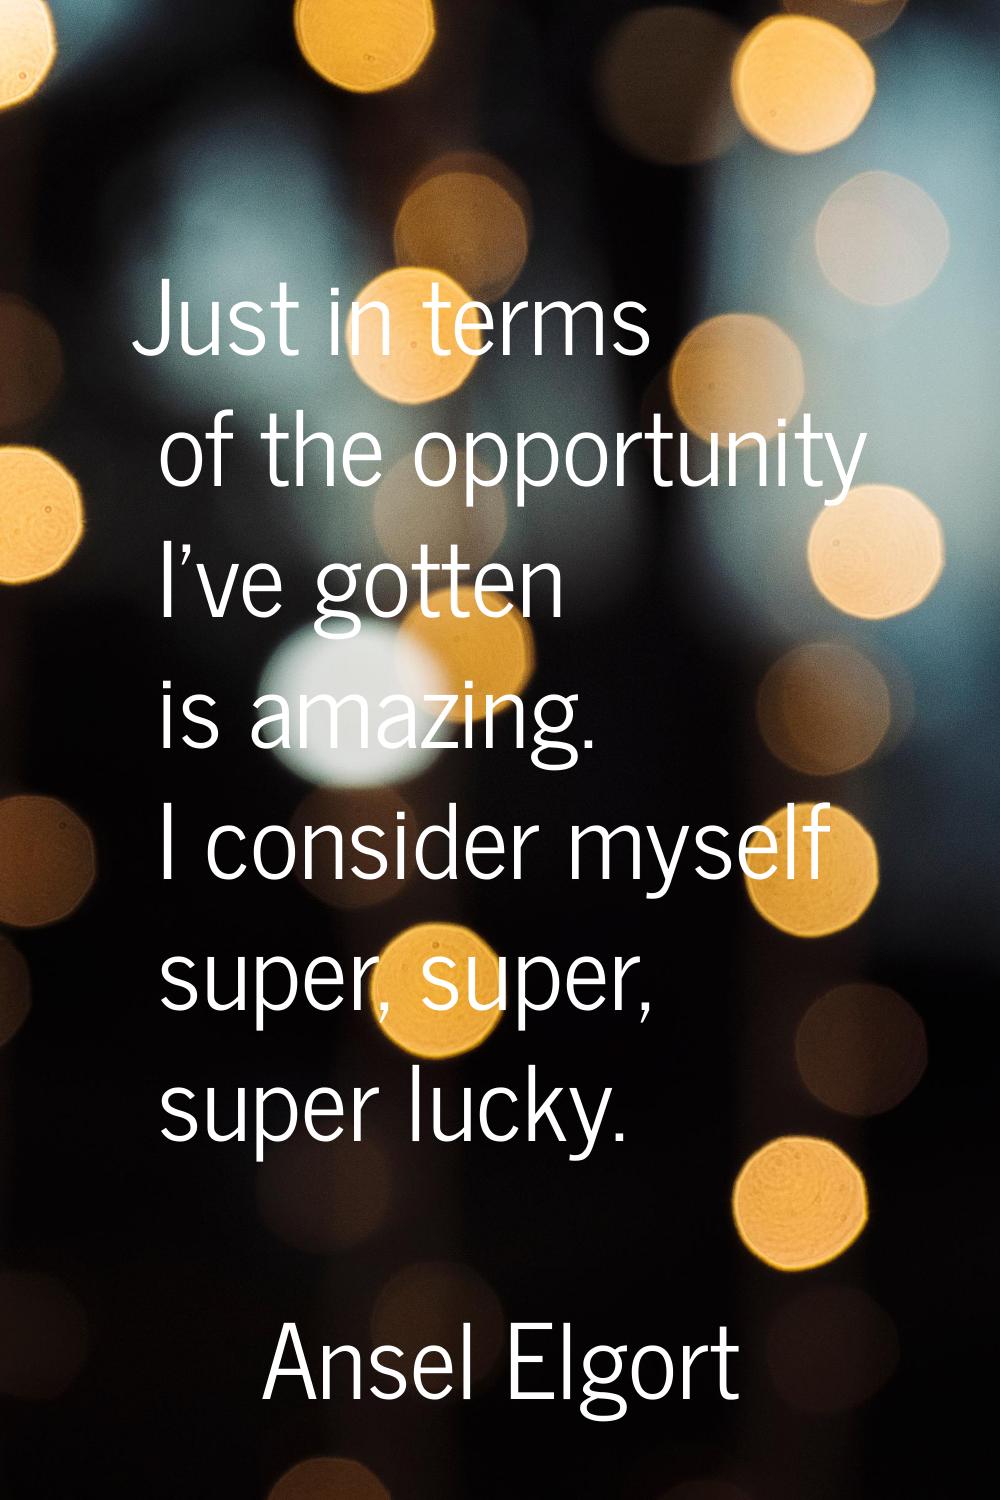 Just in terms of the opportunity I've gotten is amazing. I consider myself super, super, super luck